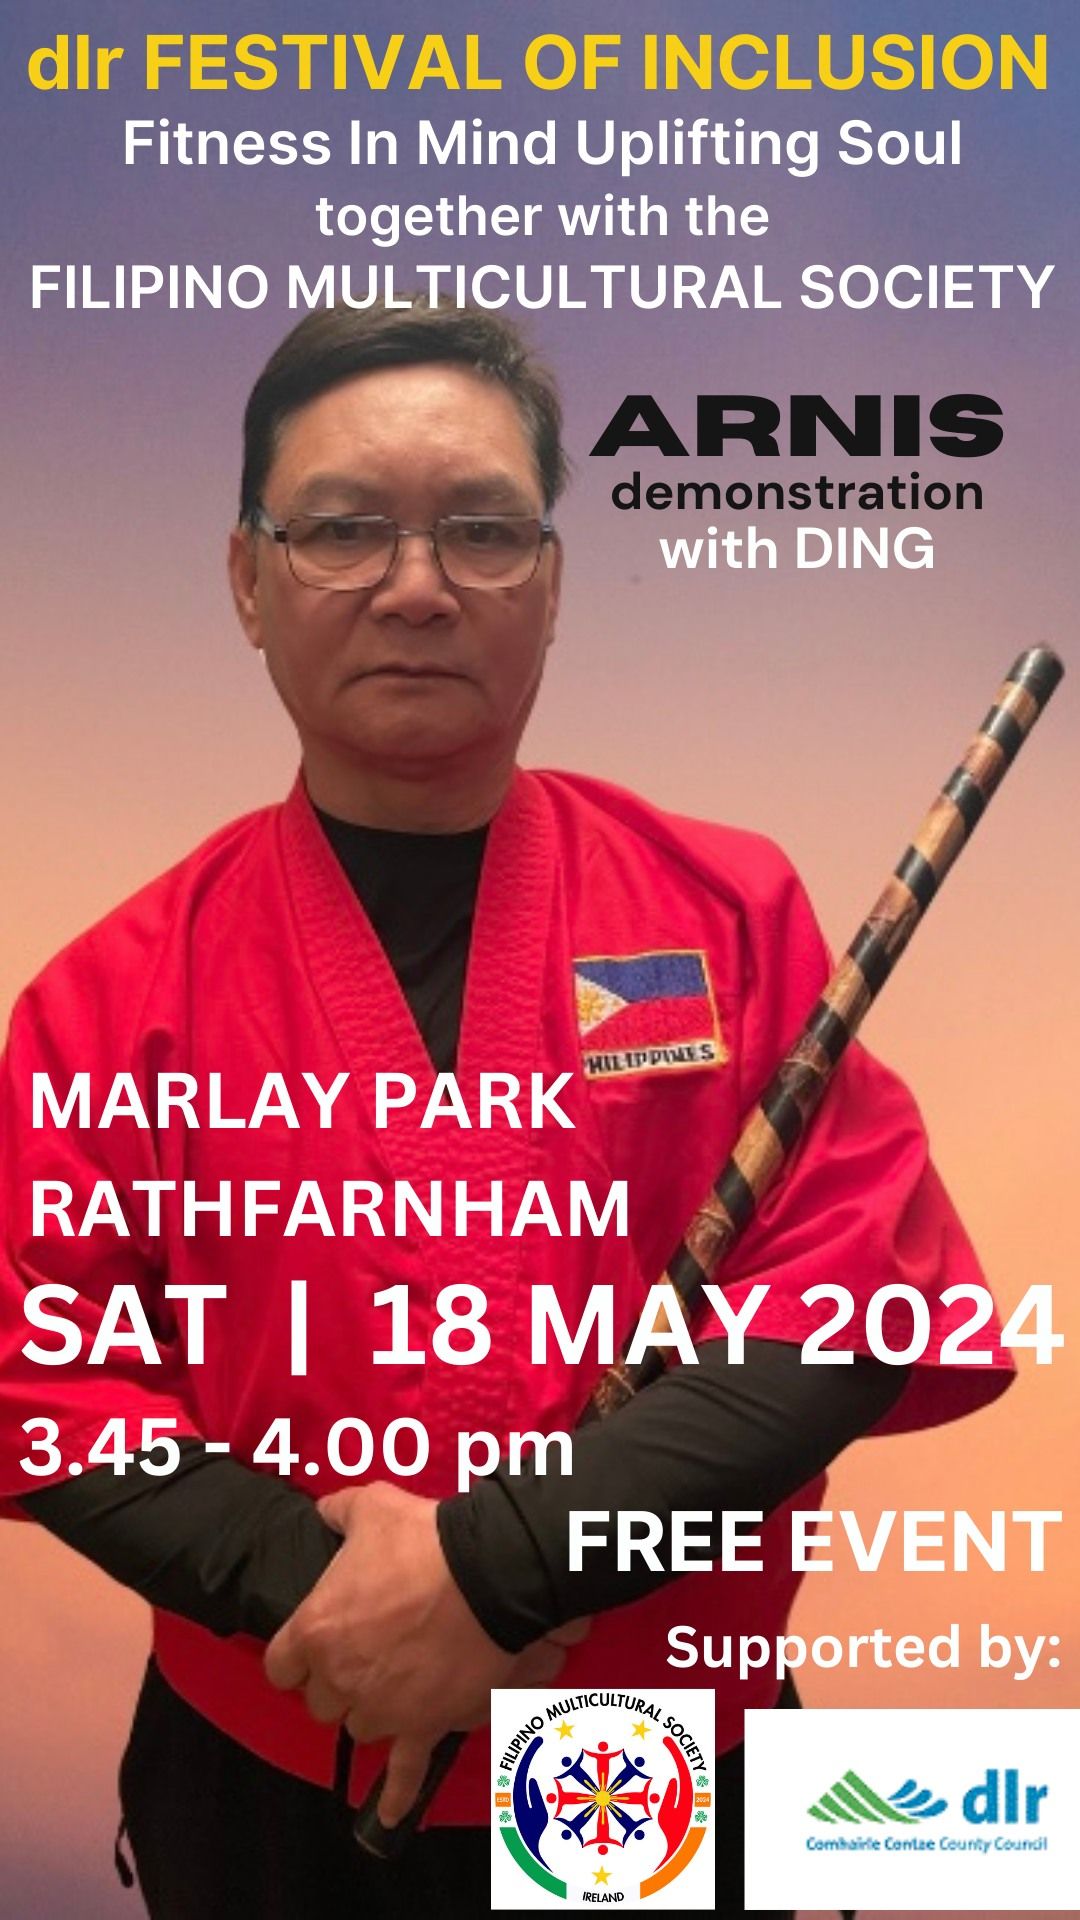 ARNIS DEMONSTRATION - FITNESS IN MIND UPLIFTING SOUL PART OF DLR FESTIVAL OF INCLUSION